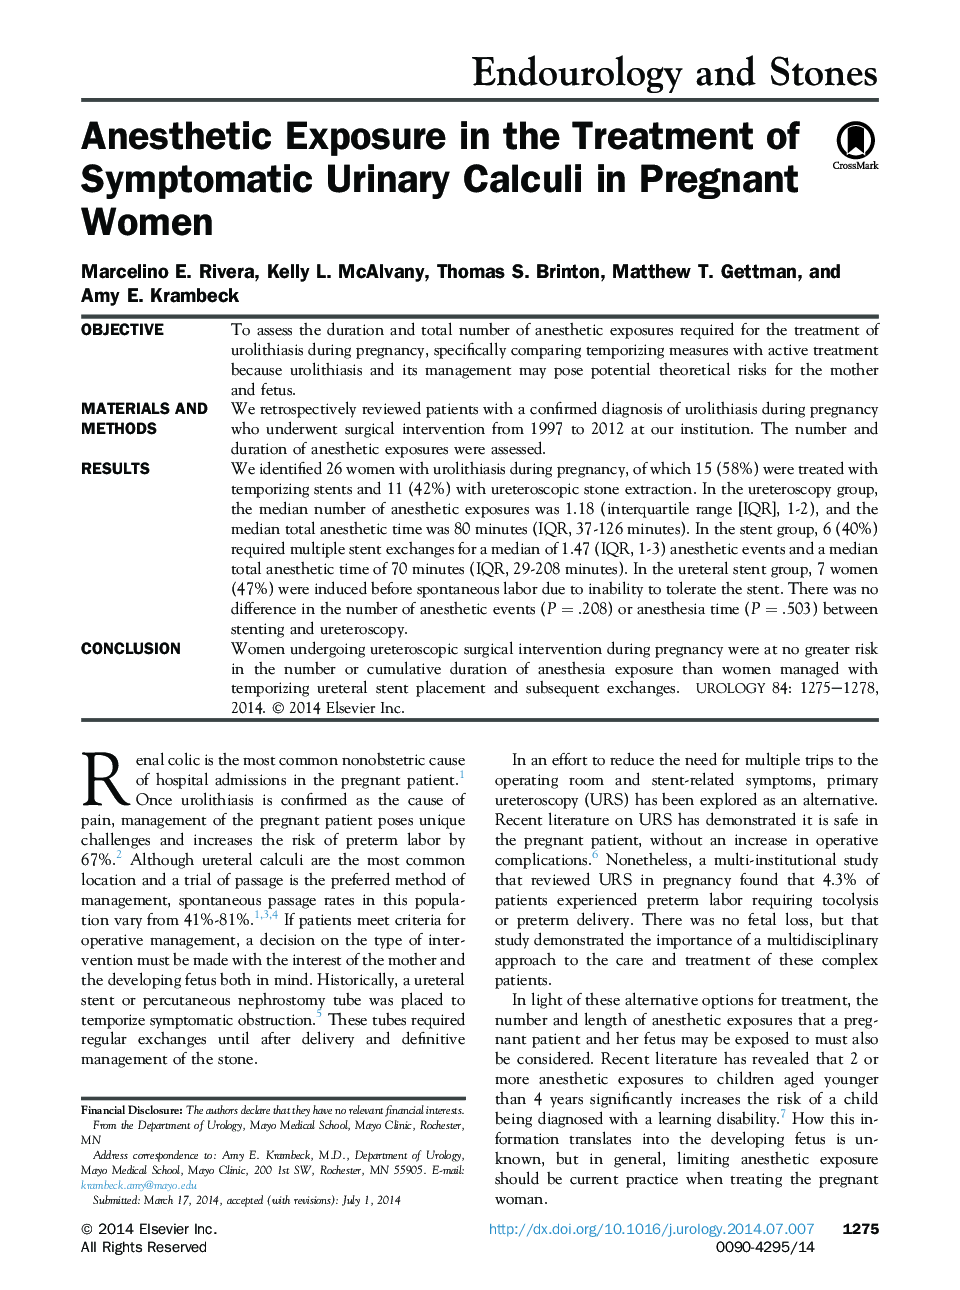 Anesthetic Exposure in the Treatment of Symptomatic Urinary Calculi in Pregnant Women 